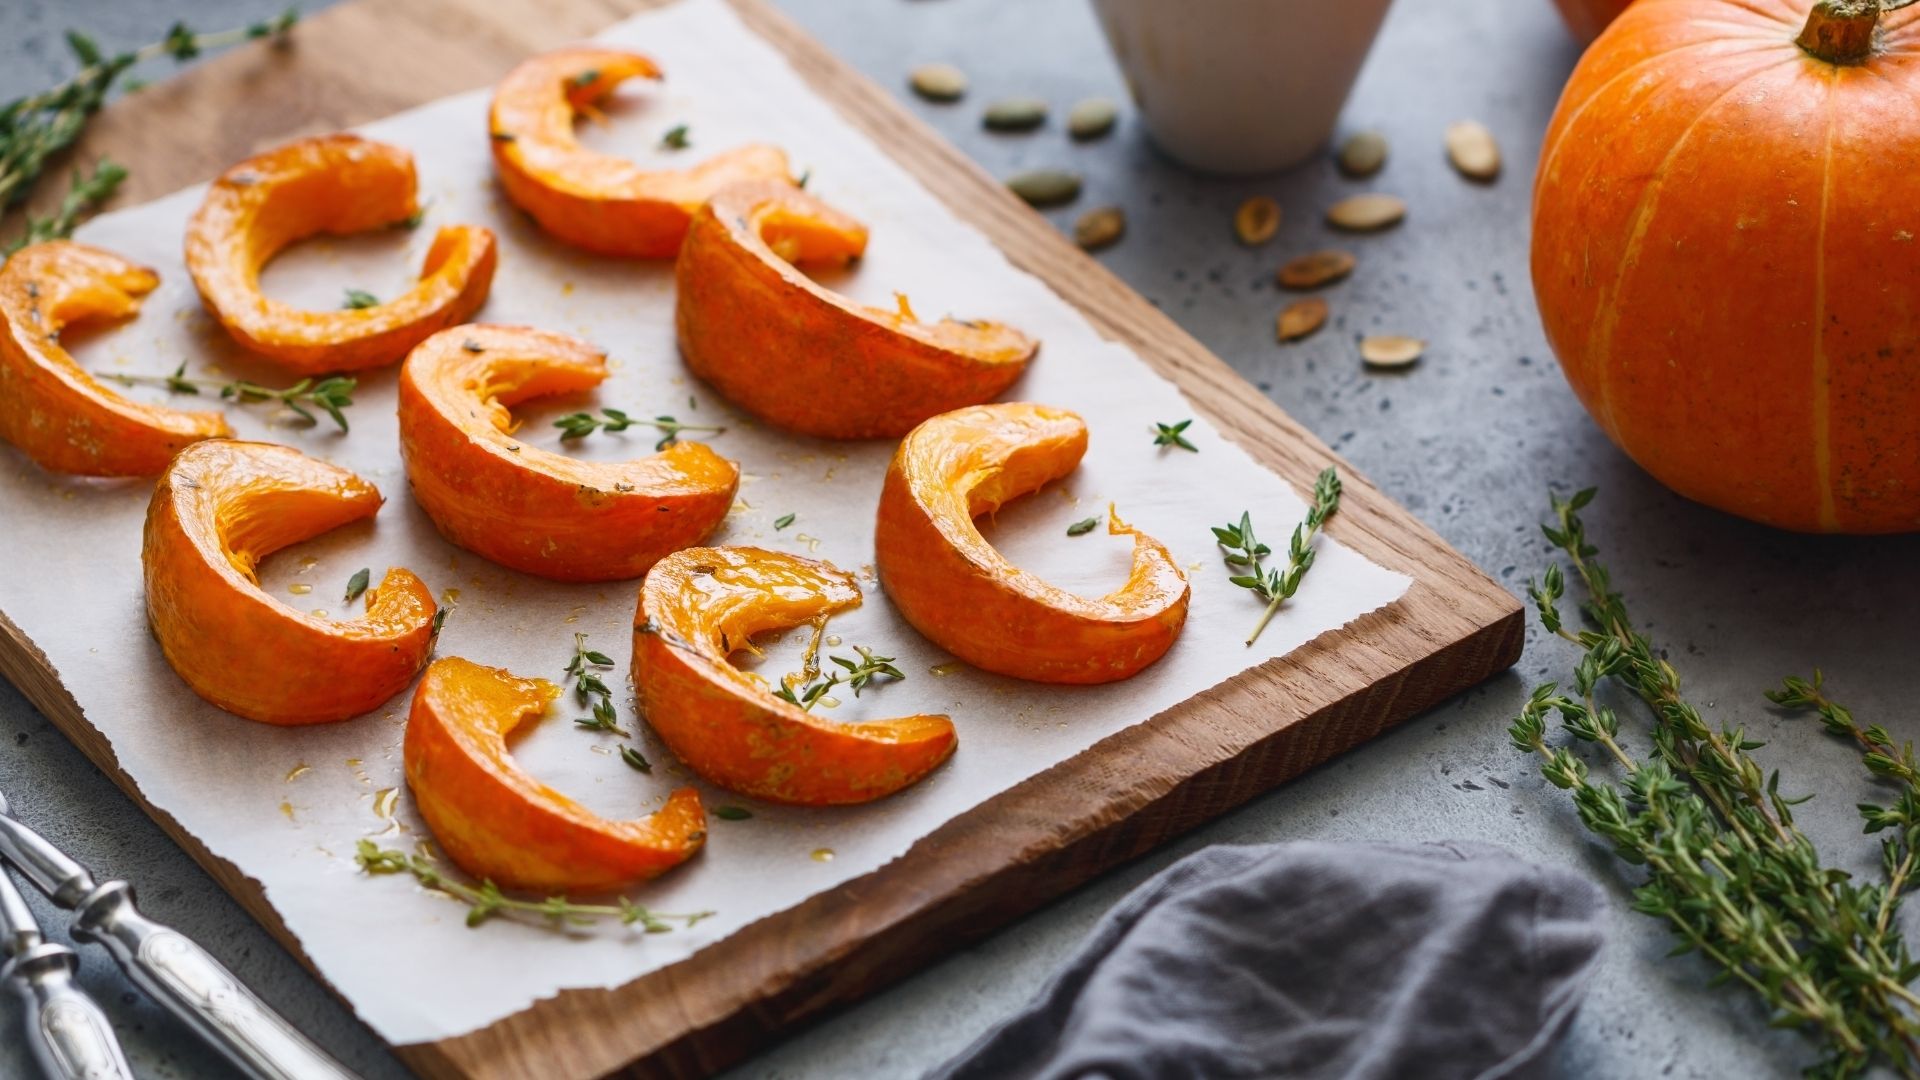 Ready for Fall? These Are the Healthy Recipes You'll Be Devouring All Season Long